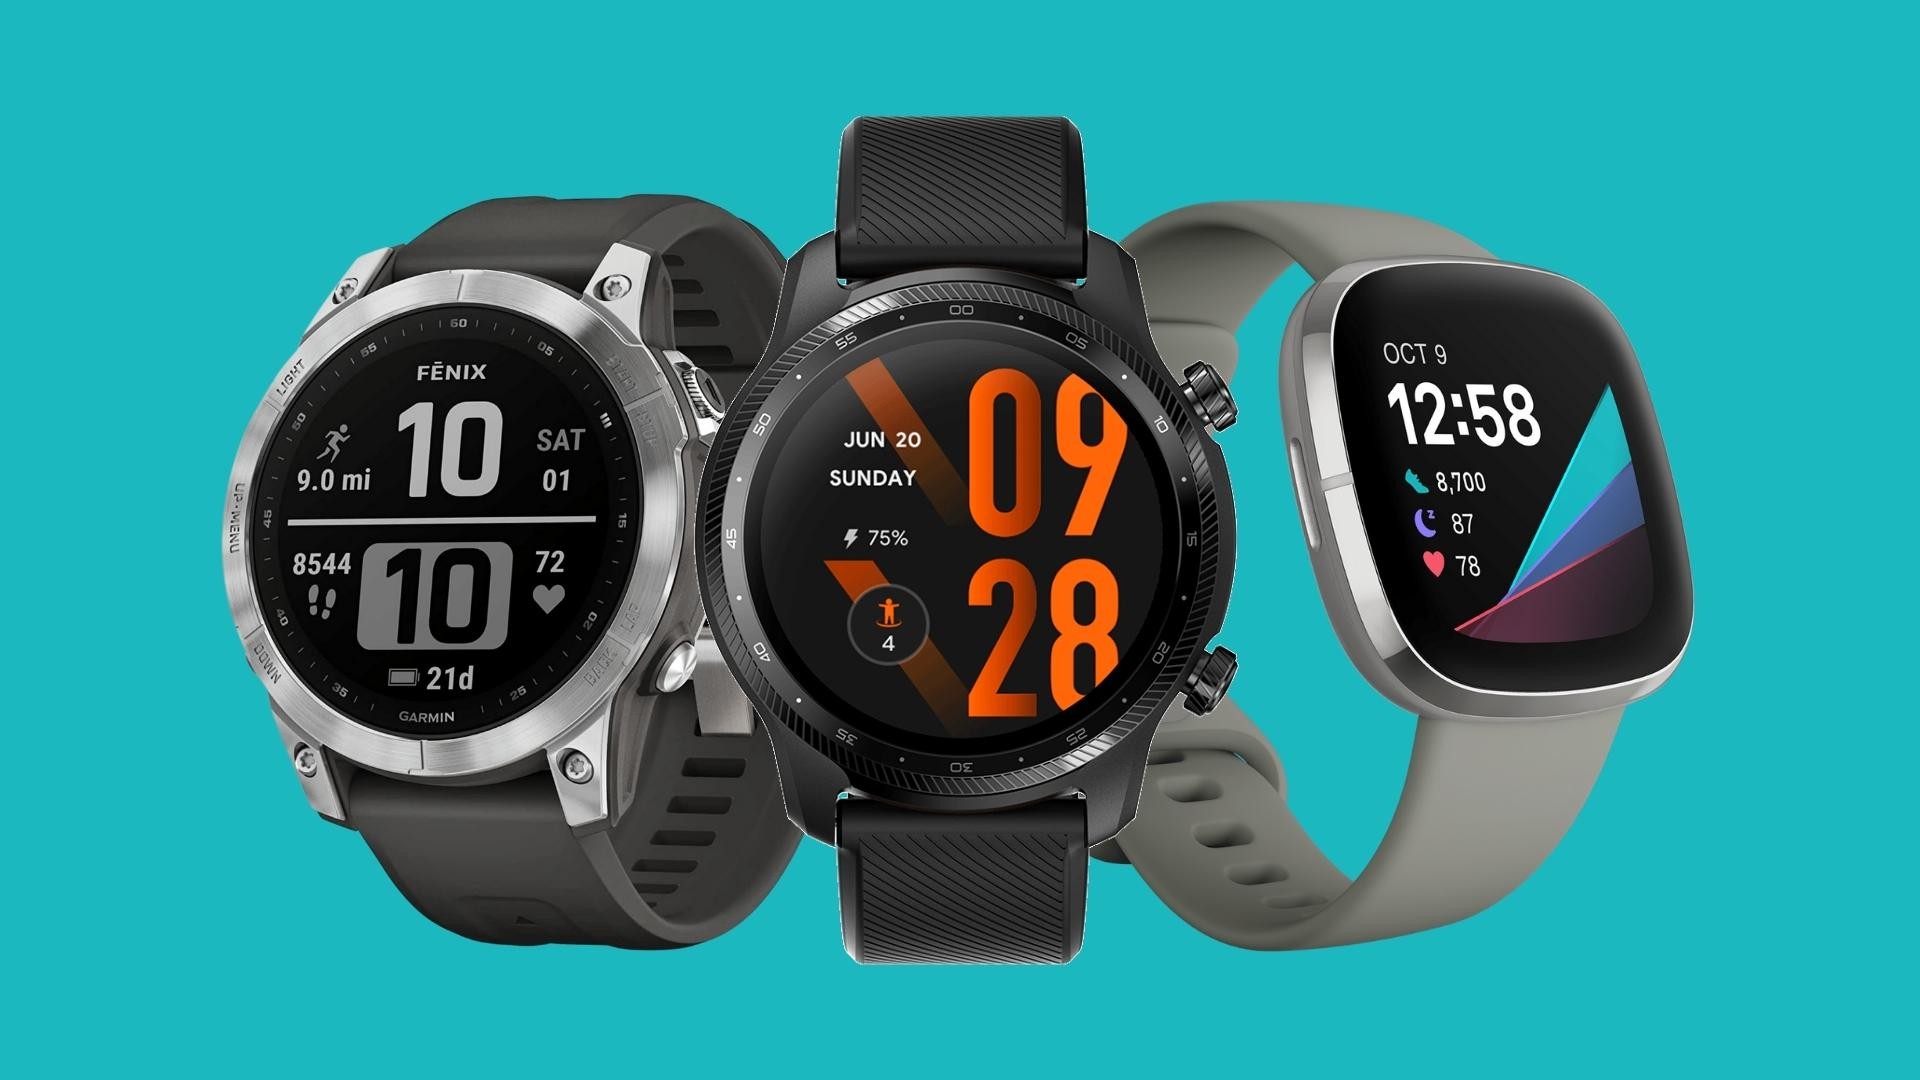 Here are the best smartwatches that work with both Android and iPhone